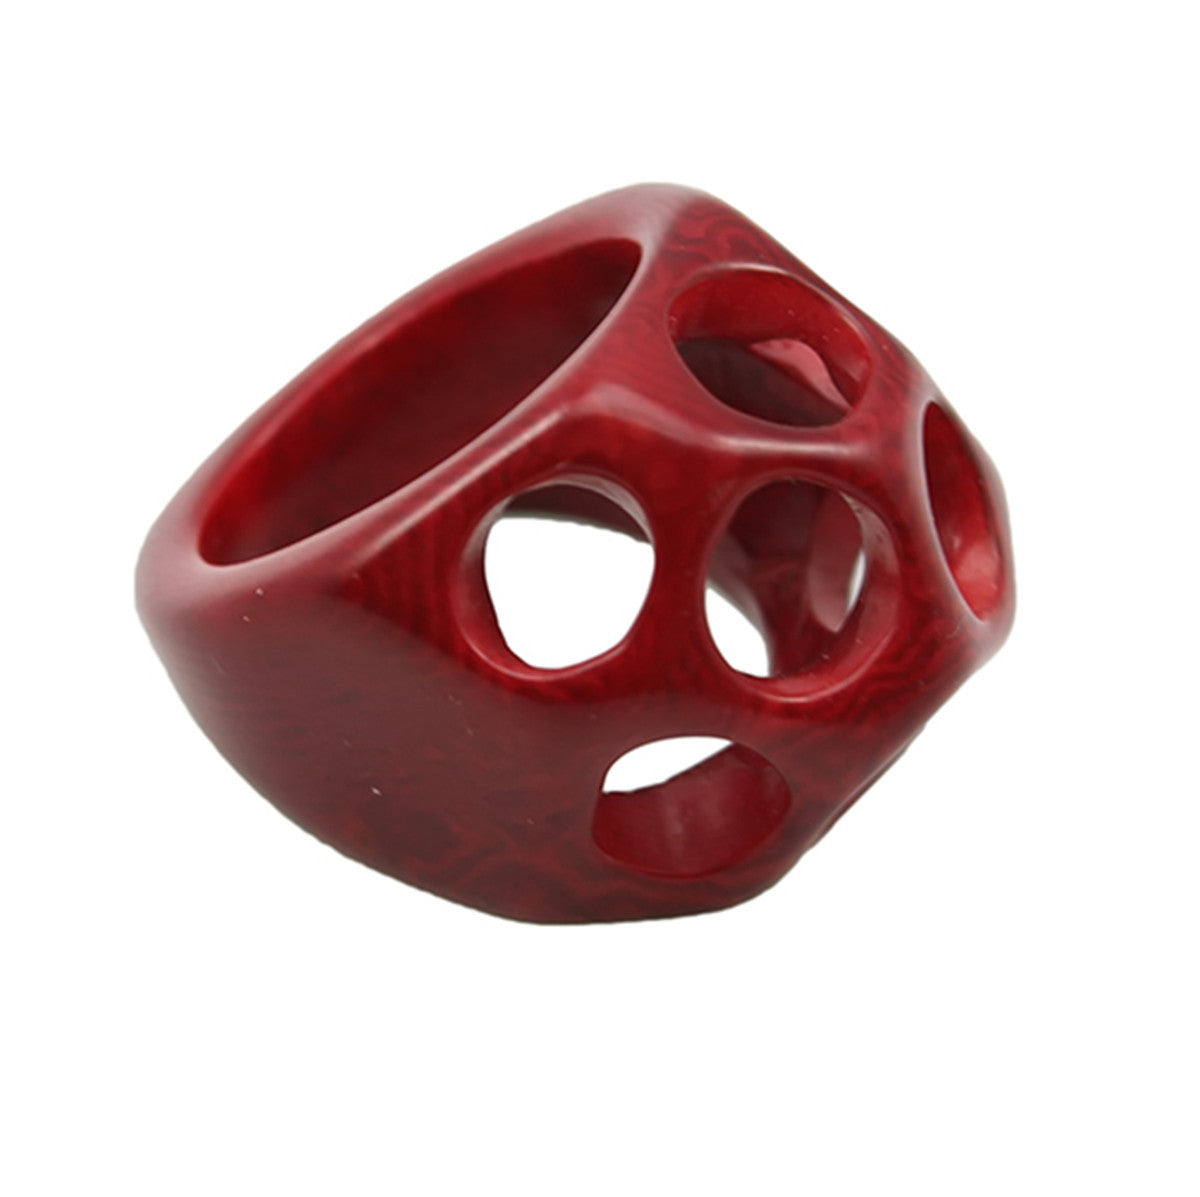 Statement Vegetable Ivory Ring in Red